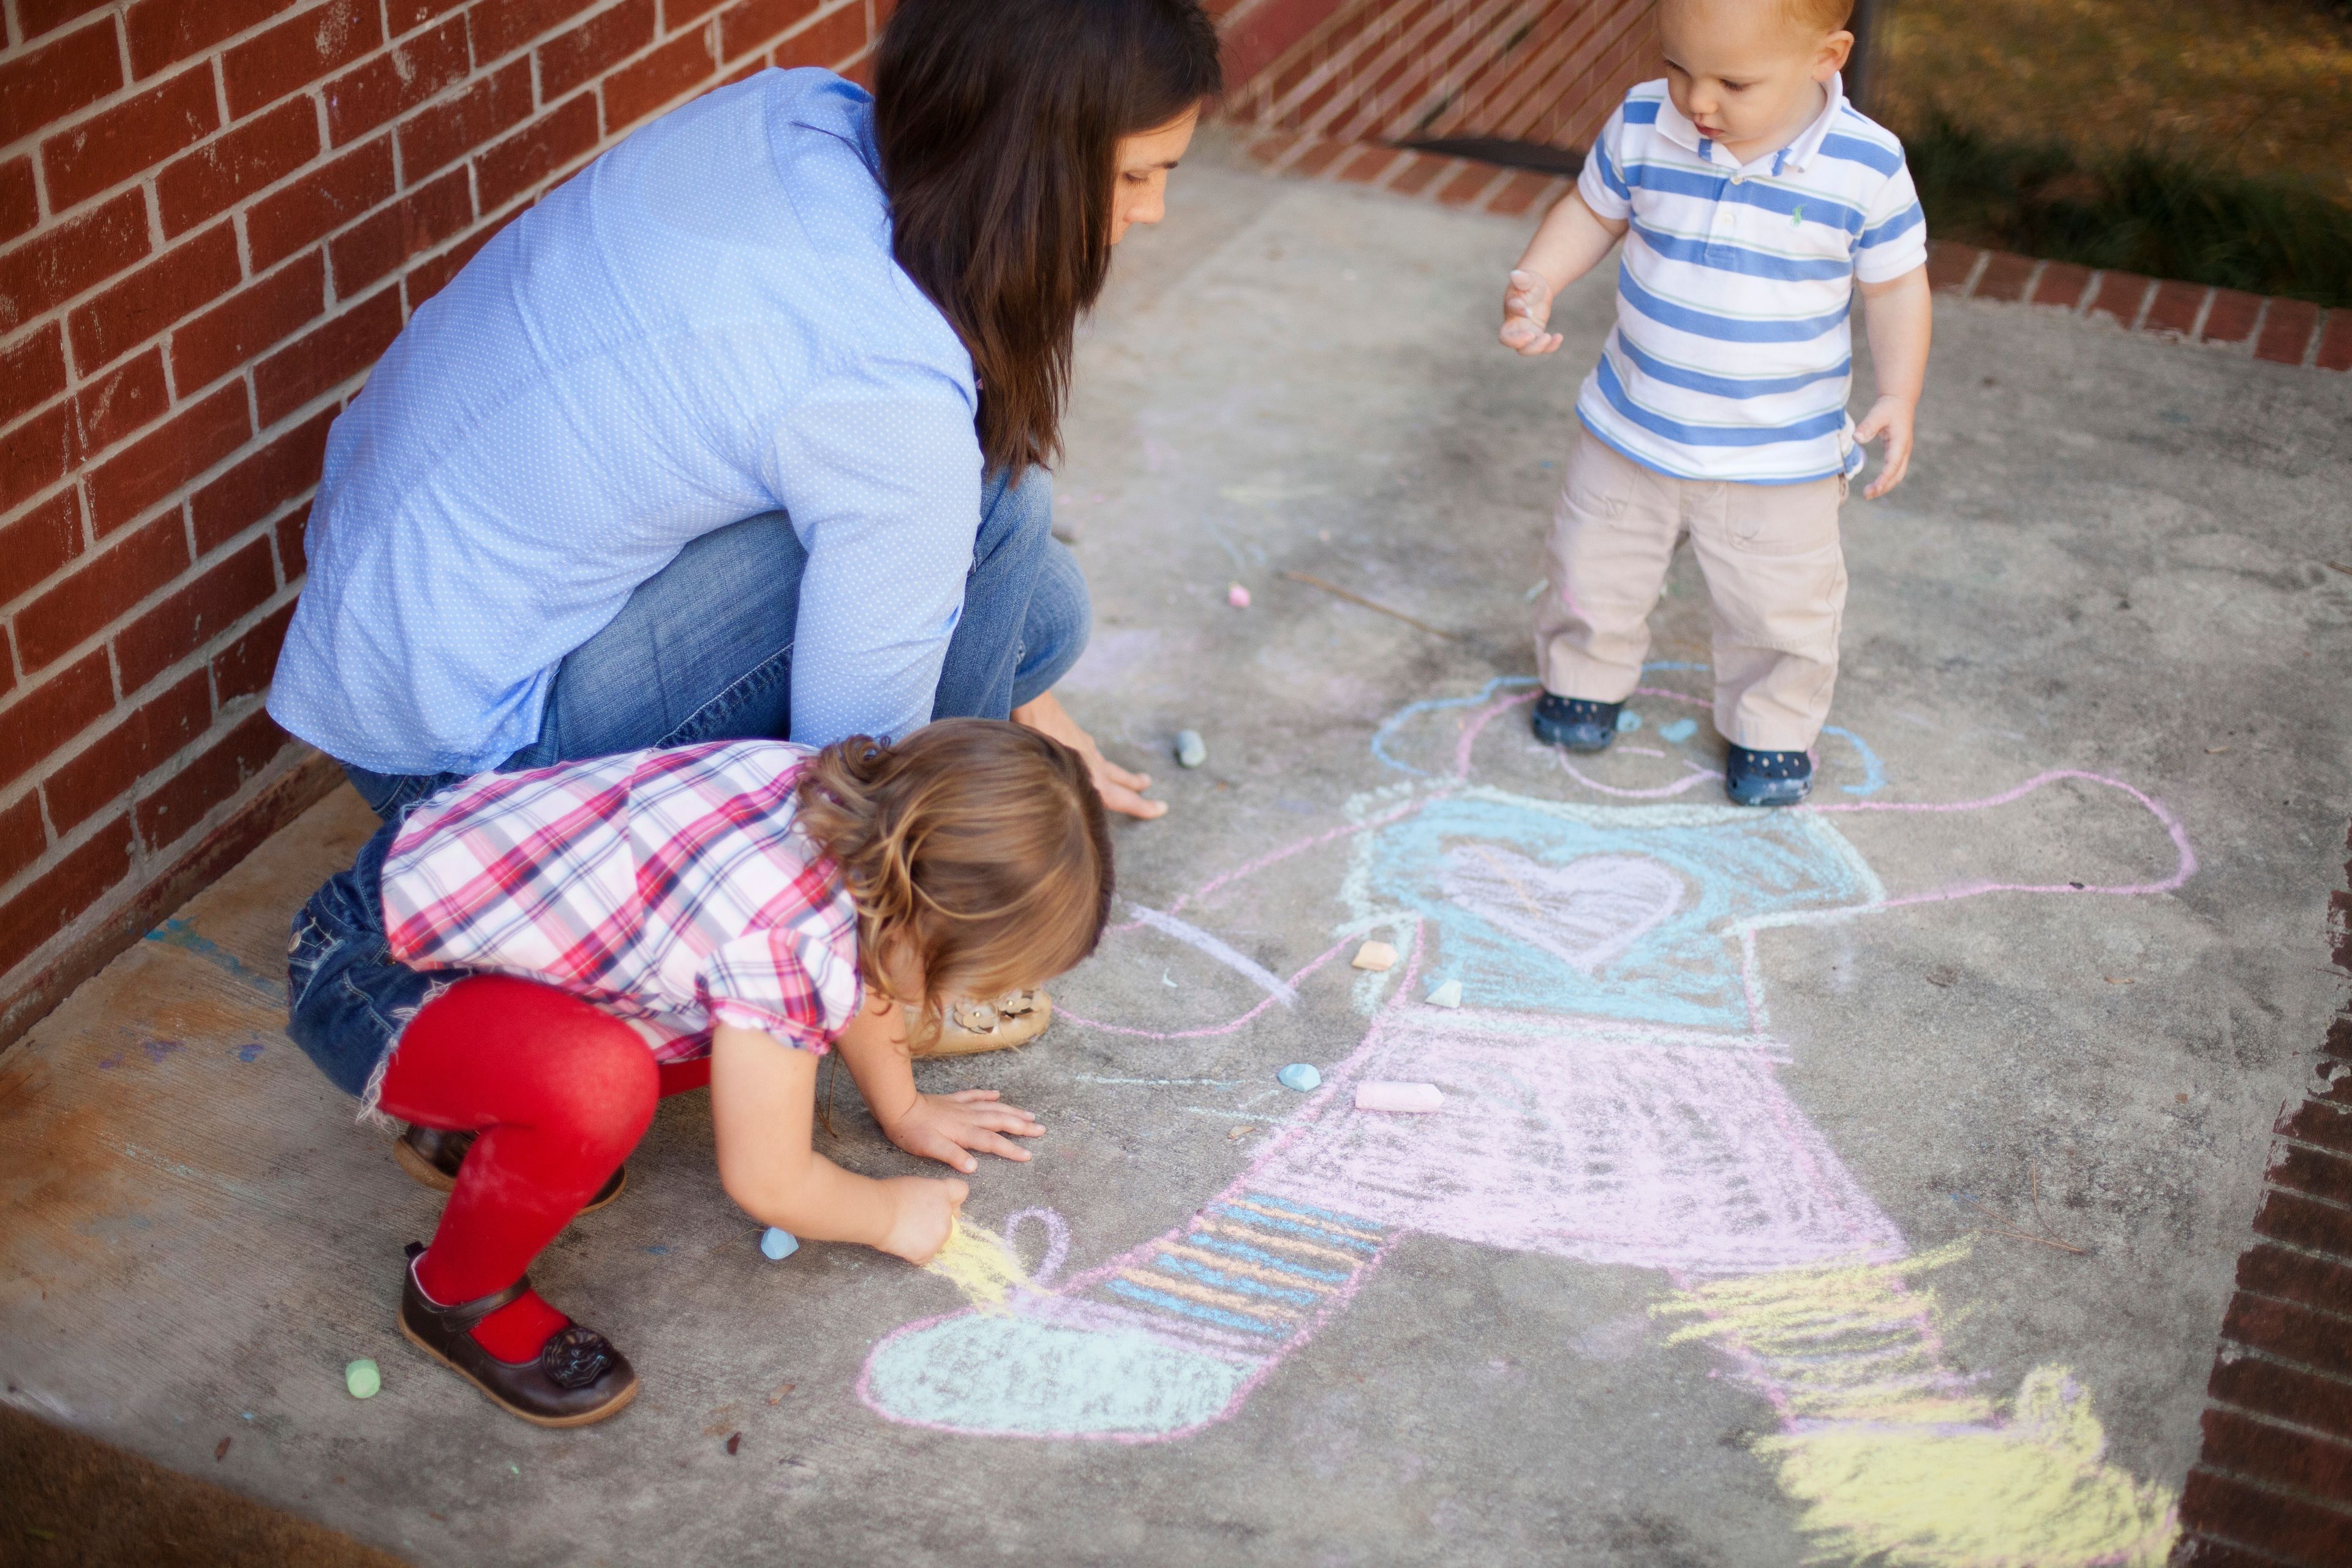 A mother kneels on the ground beside her son and daughter, who are drawing with chalk.